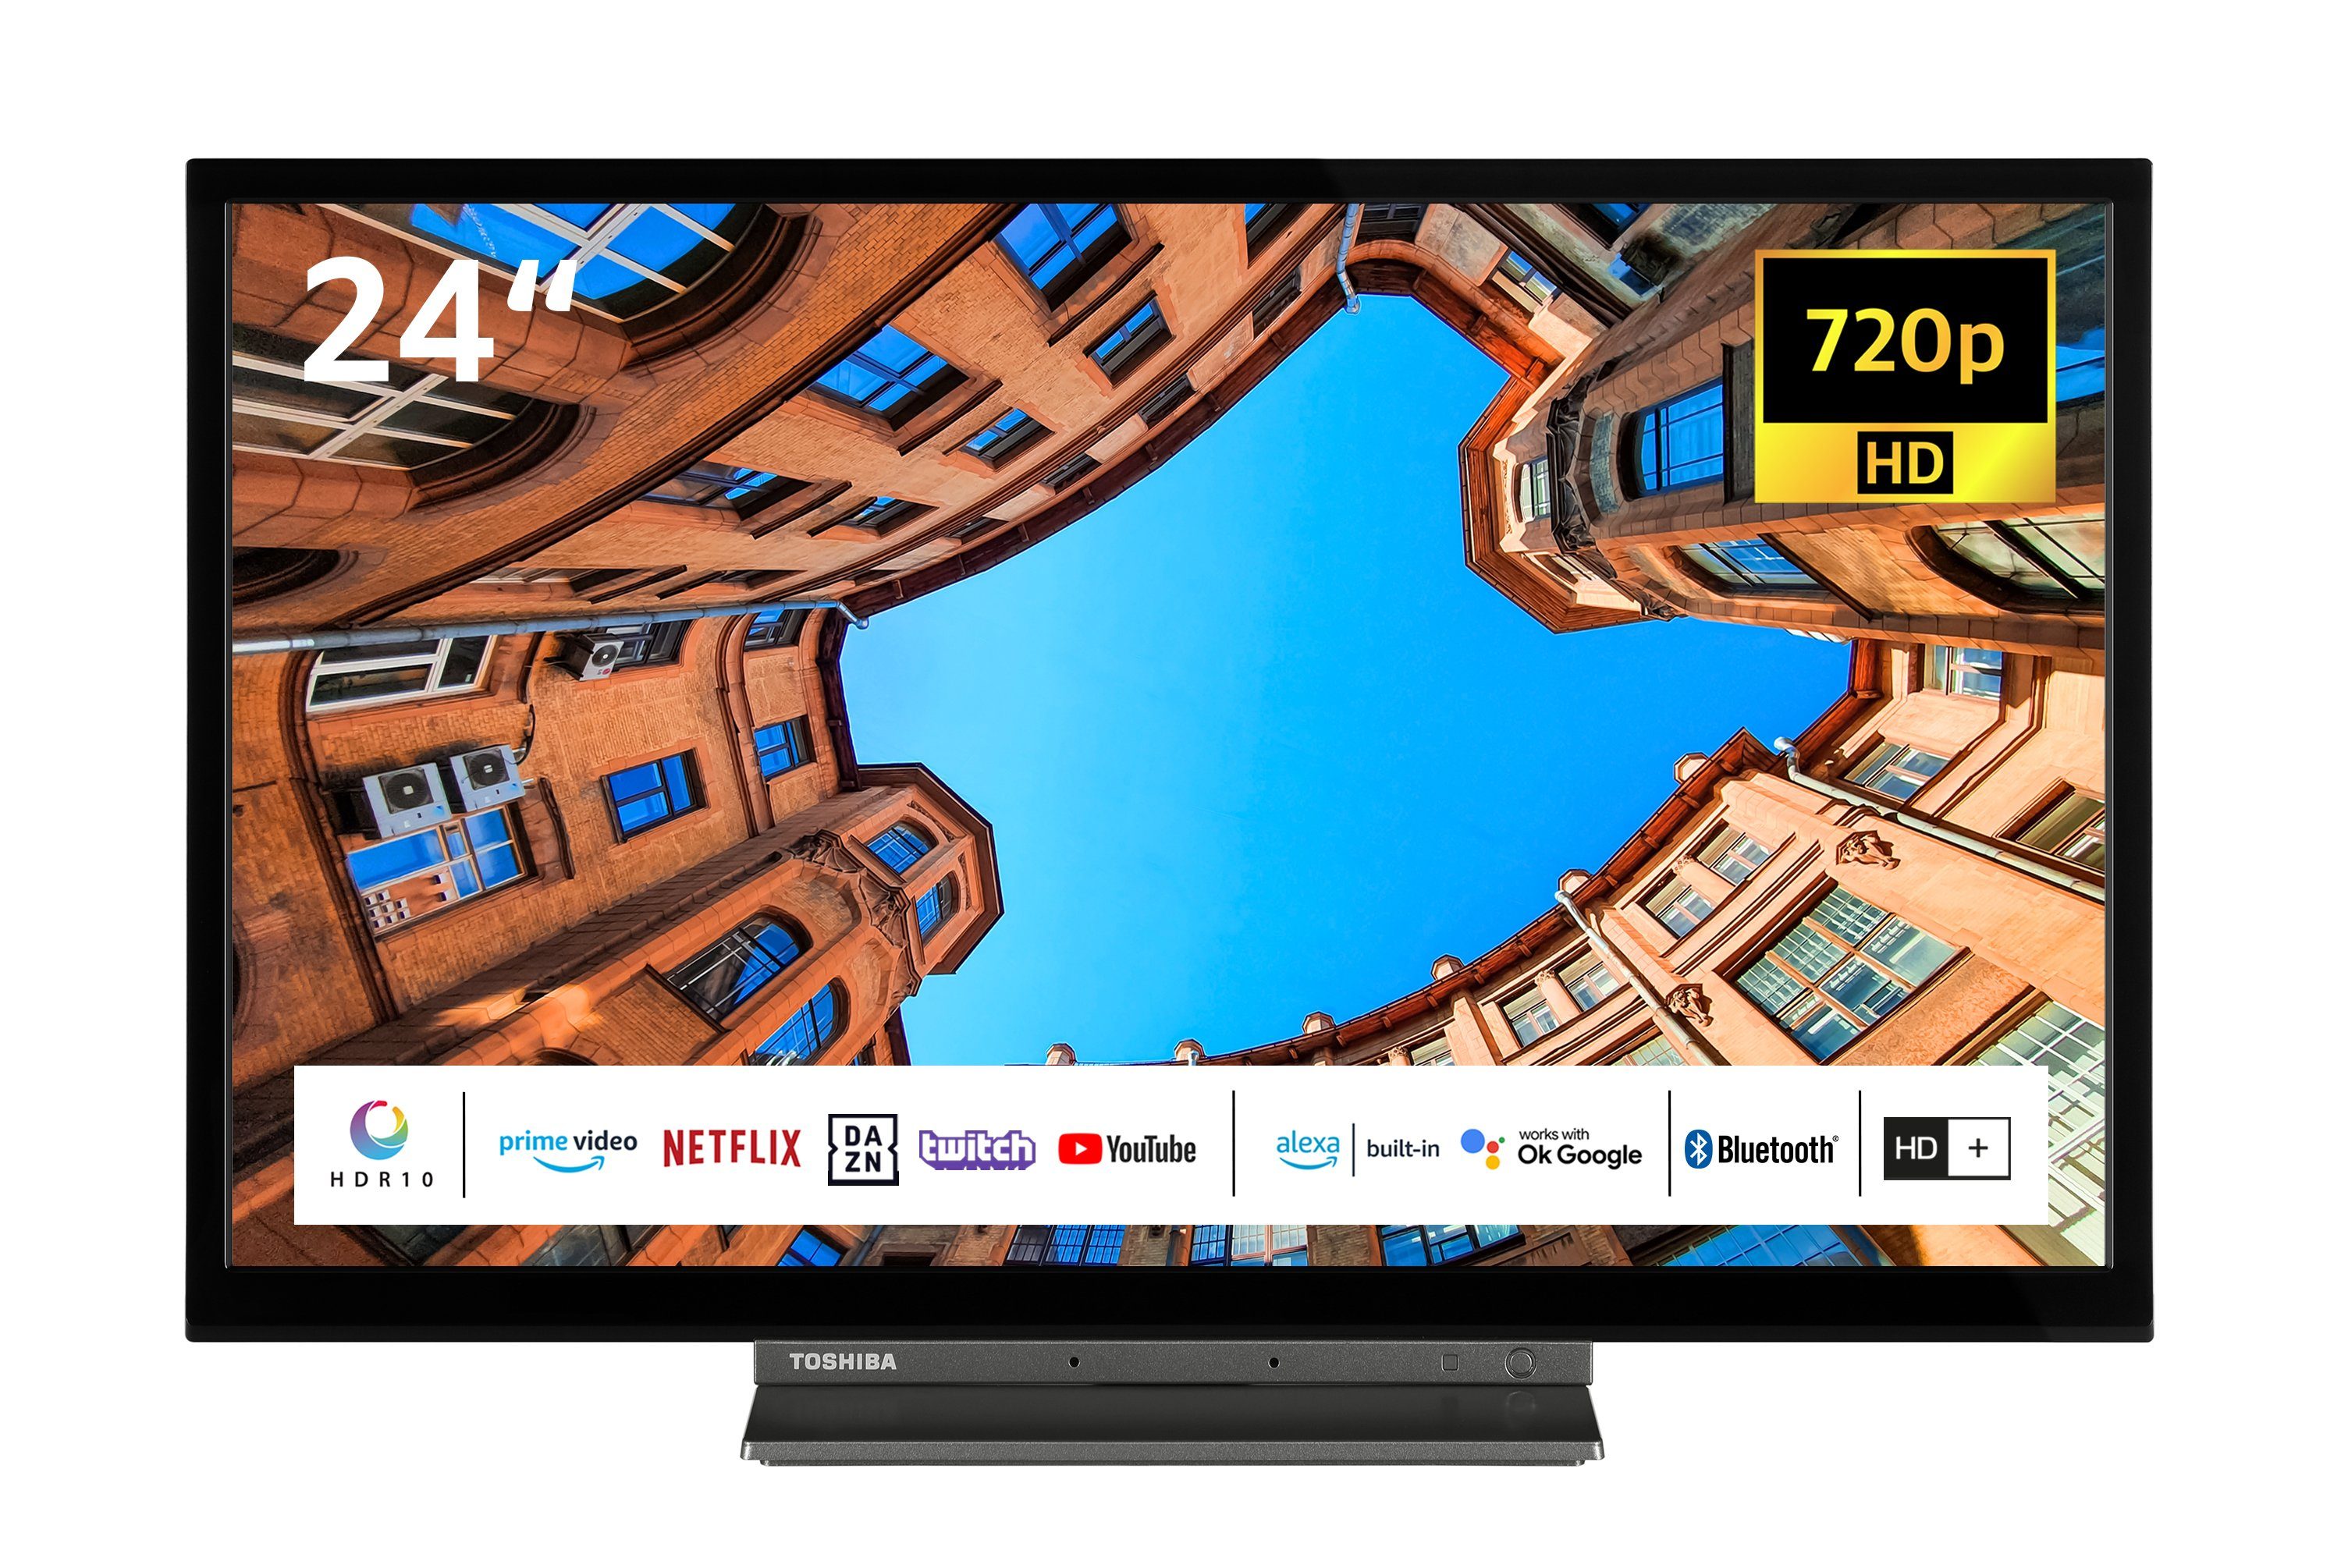 inklusive) Built-In, HD+ HDR, Toshiba LCD-LED Smart HD-ready, 24WK3C63DAY/2 Fernseher TV, Triple-Tuner, cm/24 Zoll, Alexa Monate (60 6